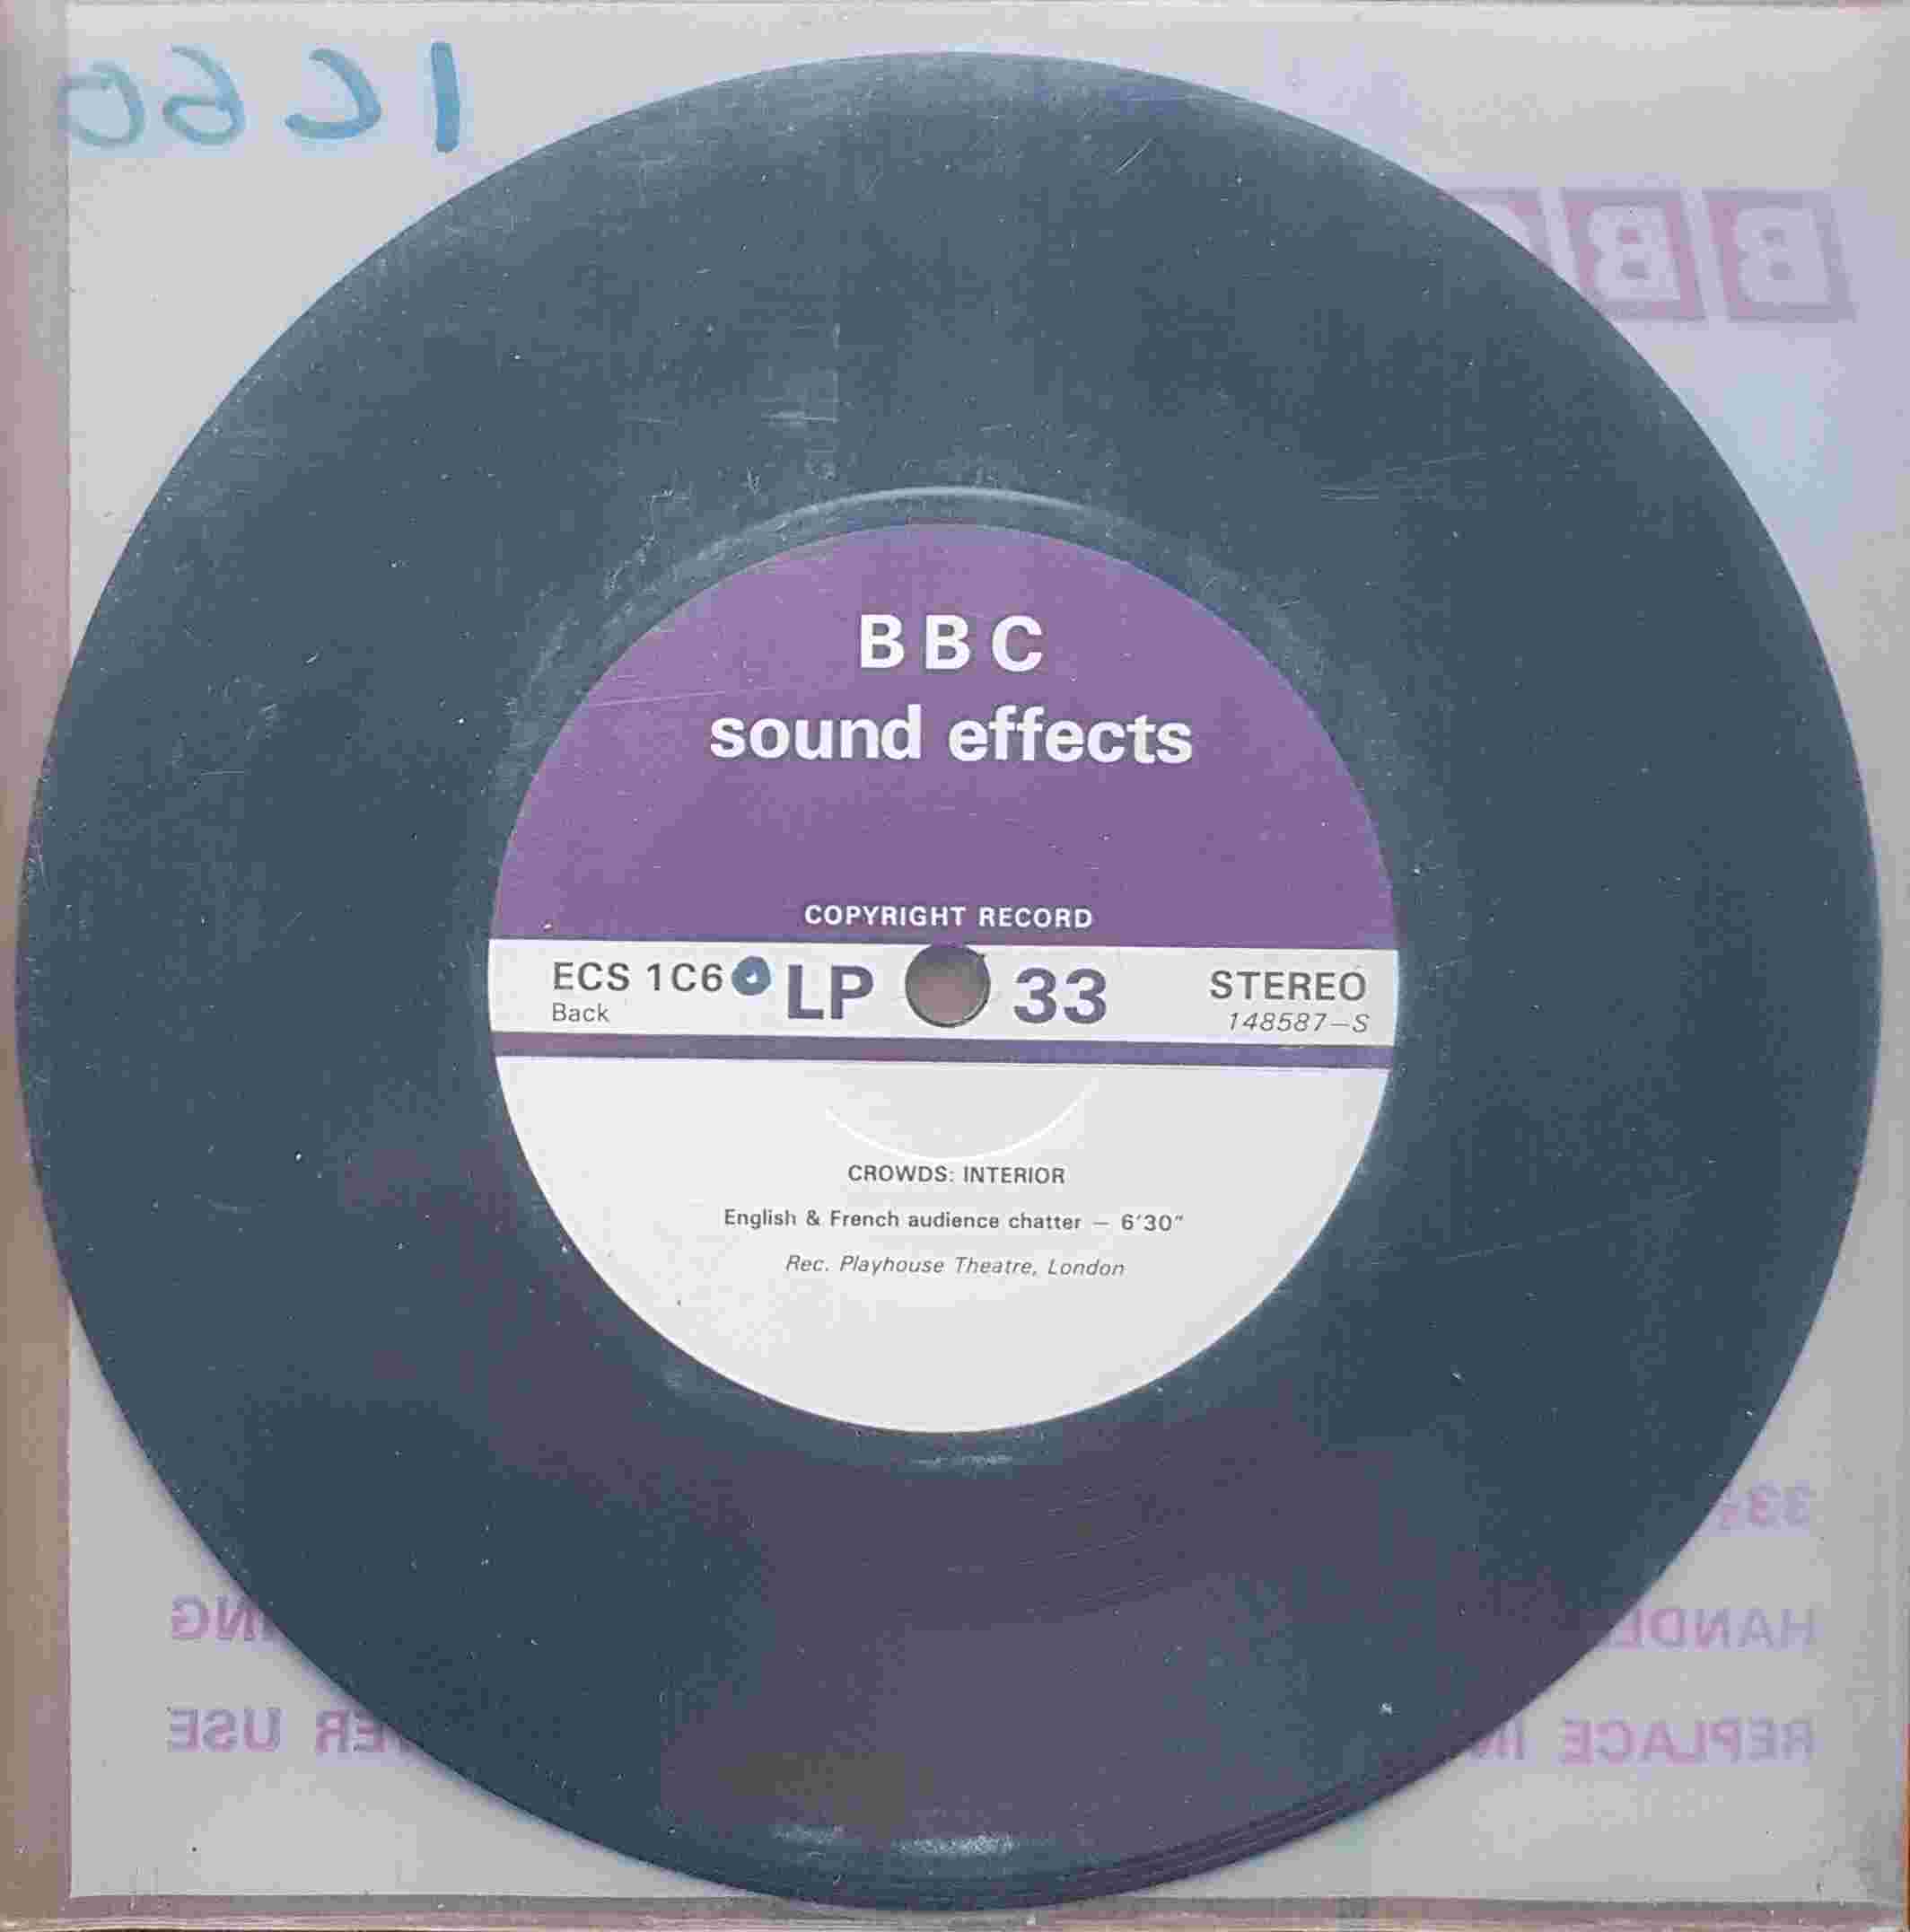 Picture of ECS 1C60 Crowds: Interior (Rec. Playhouse Theatre, London) by artist Not registered from the BBC records and Tapes library